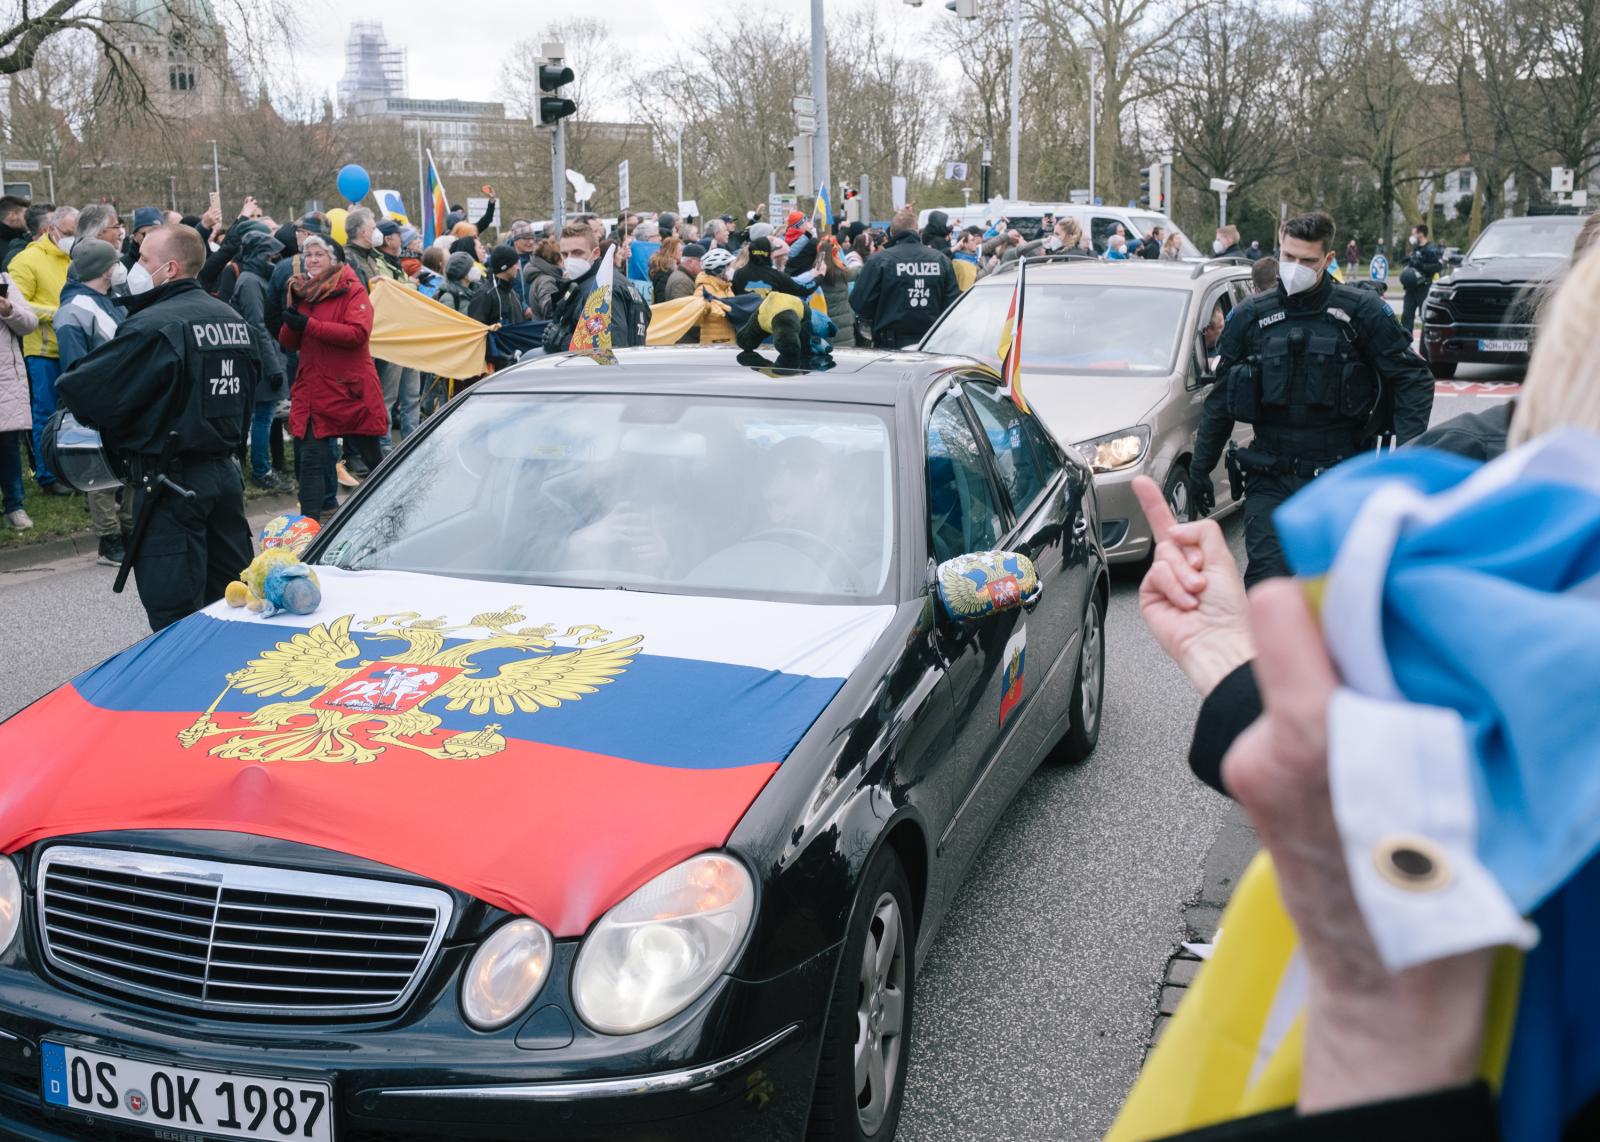 Russian Motorcade in Hanover Blocked - A car with Russian flag encircled by counter-protesters...